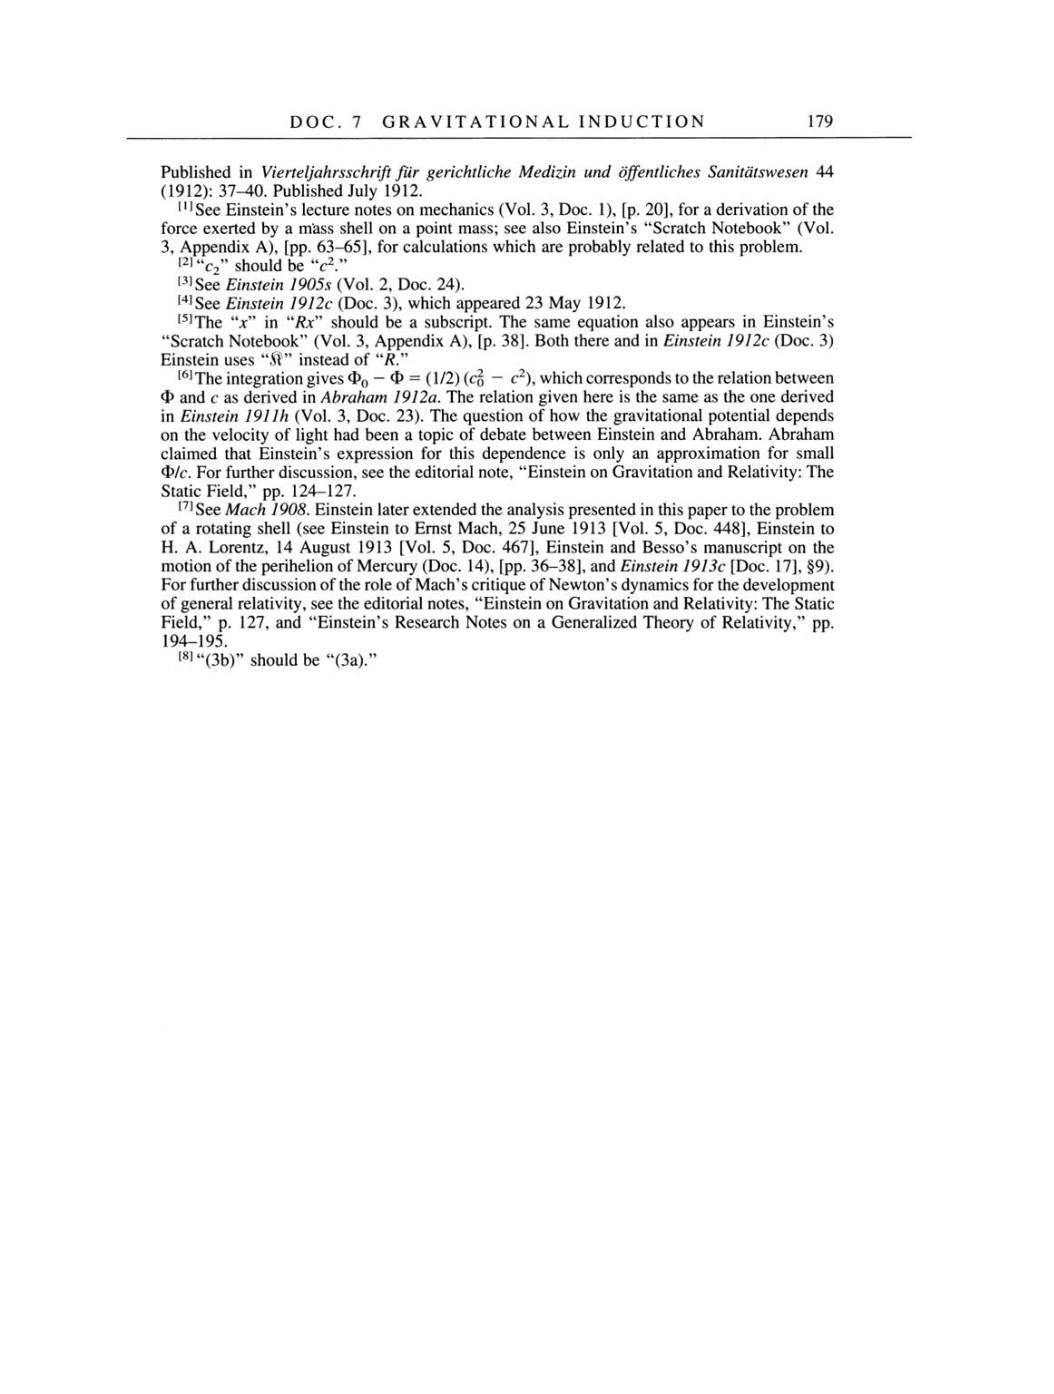 Volume 4: The Swiss Years: Writings 1912-1914 page 179